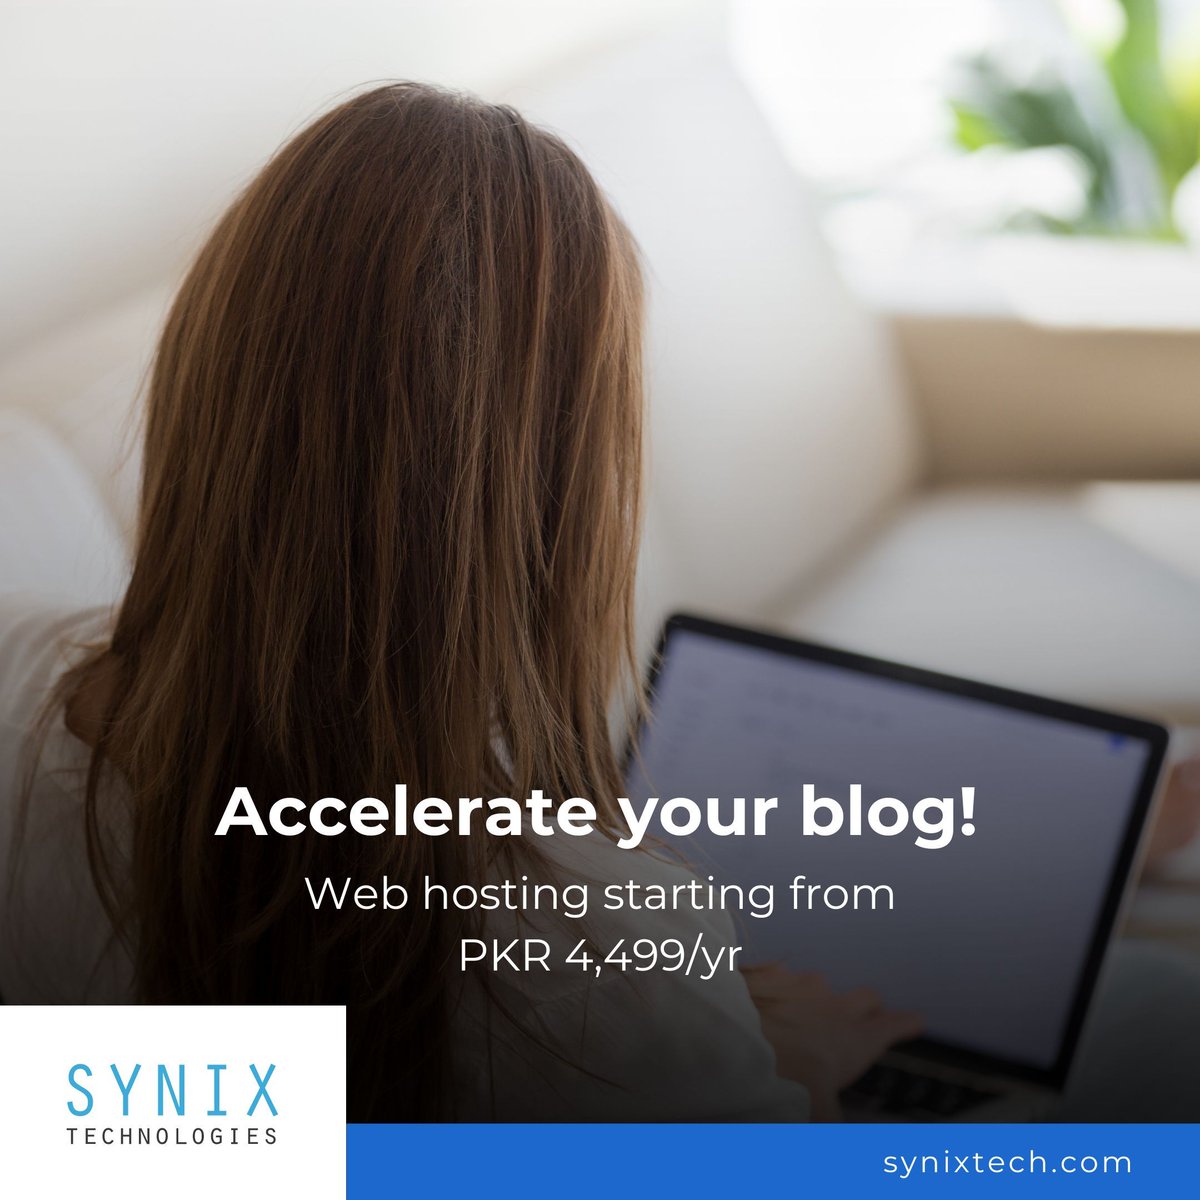 Supercharge your blogging journey with lightning-fast hosting from Synix Technologies. Ensure seamless content delivery to your readers. Start blogging at lightning speed!

#WordpressHosting #WebHosting #Pakistan #Bloggers